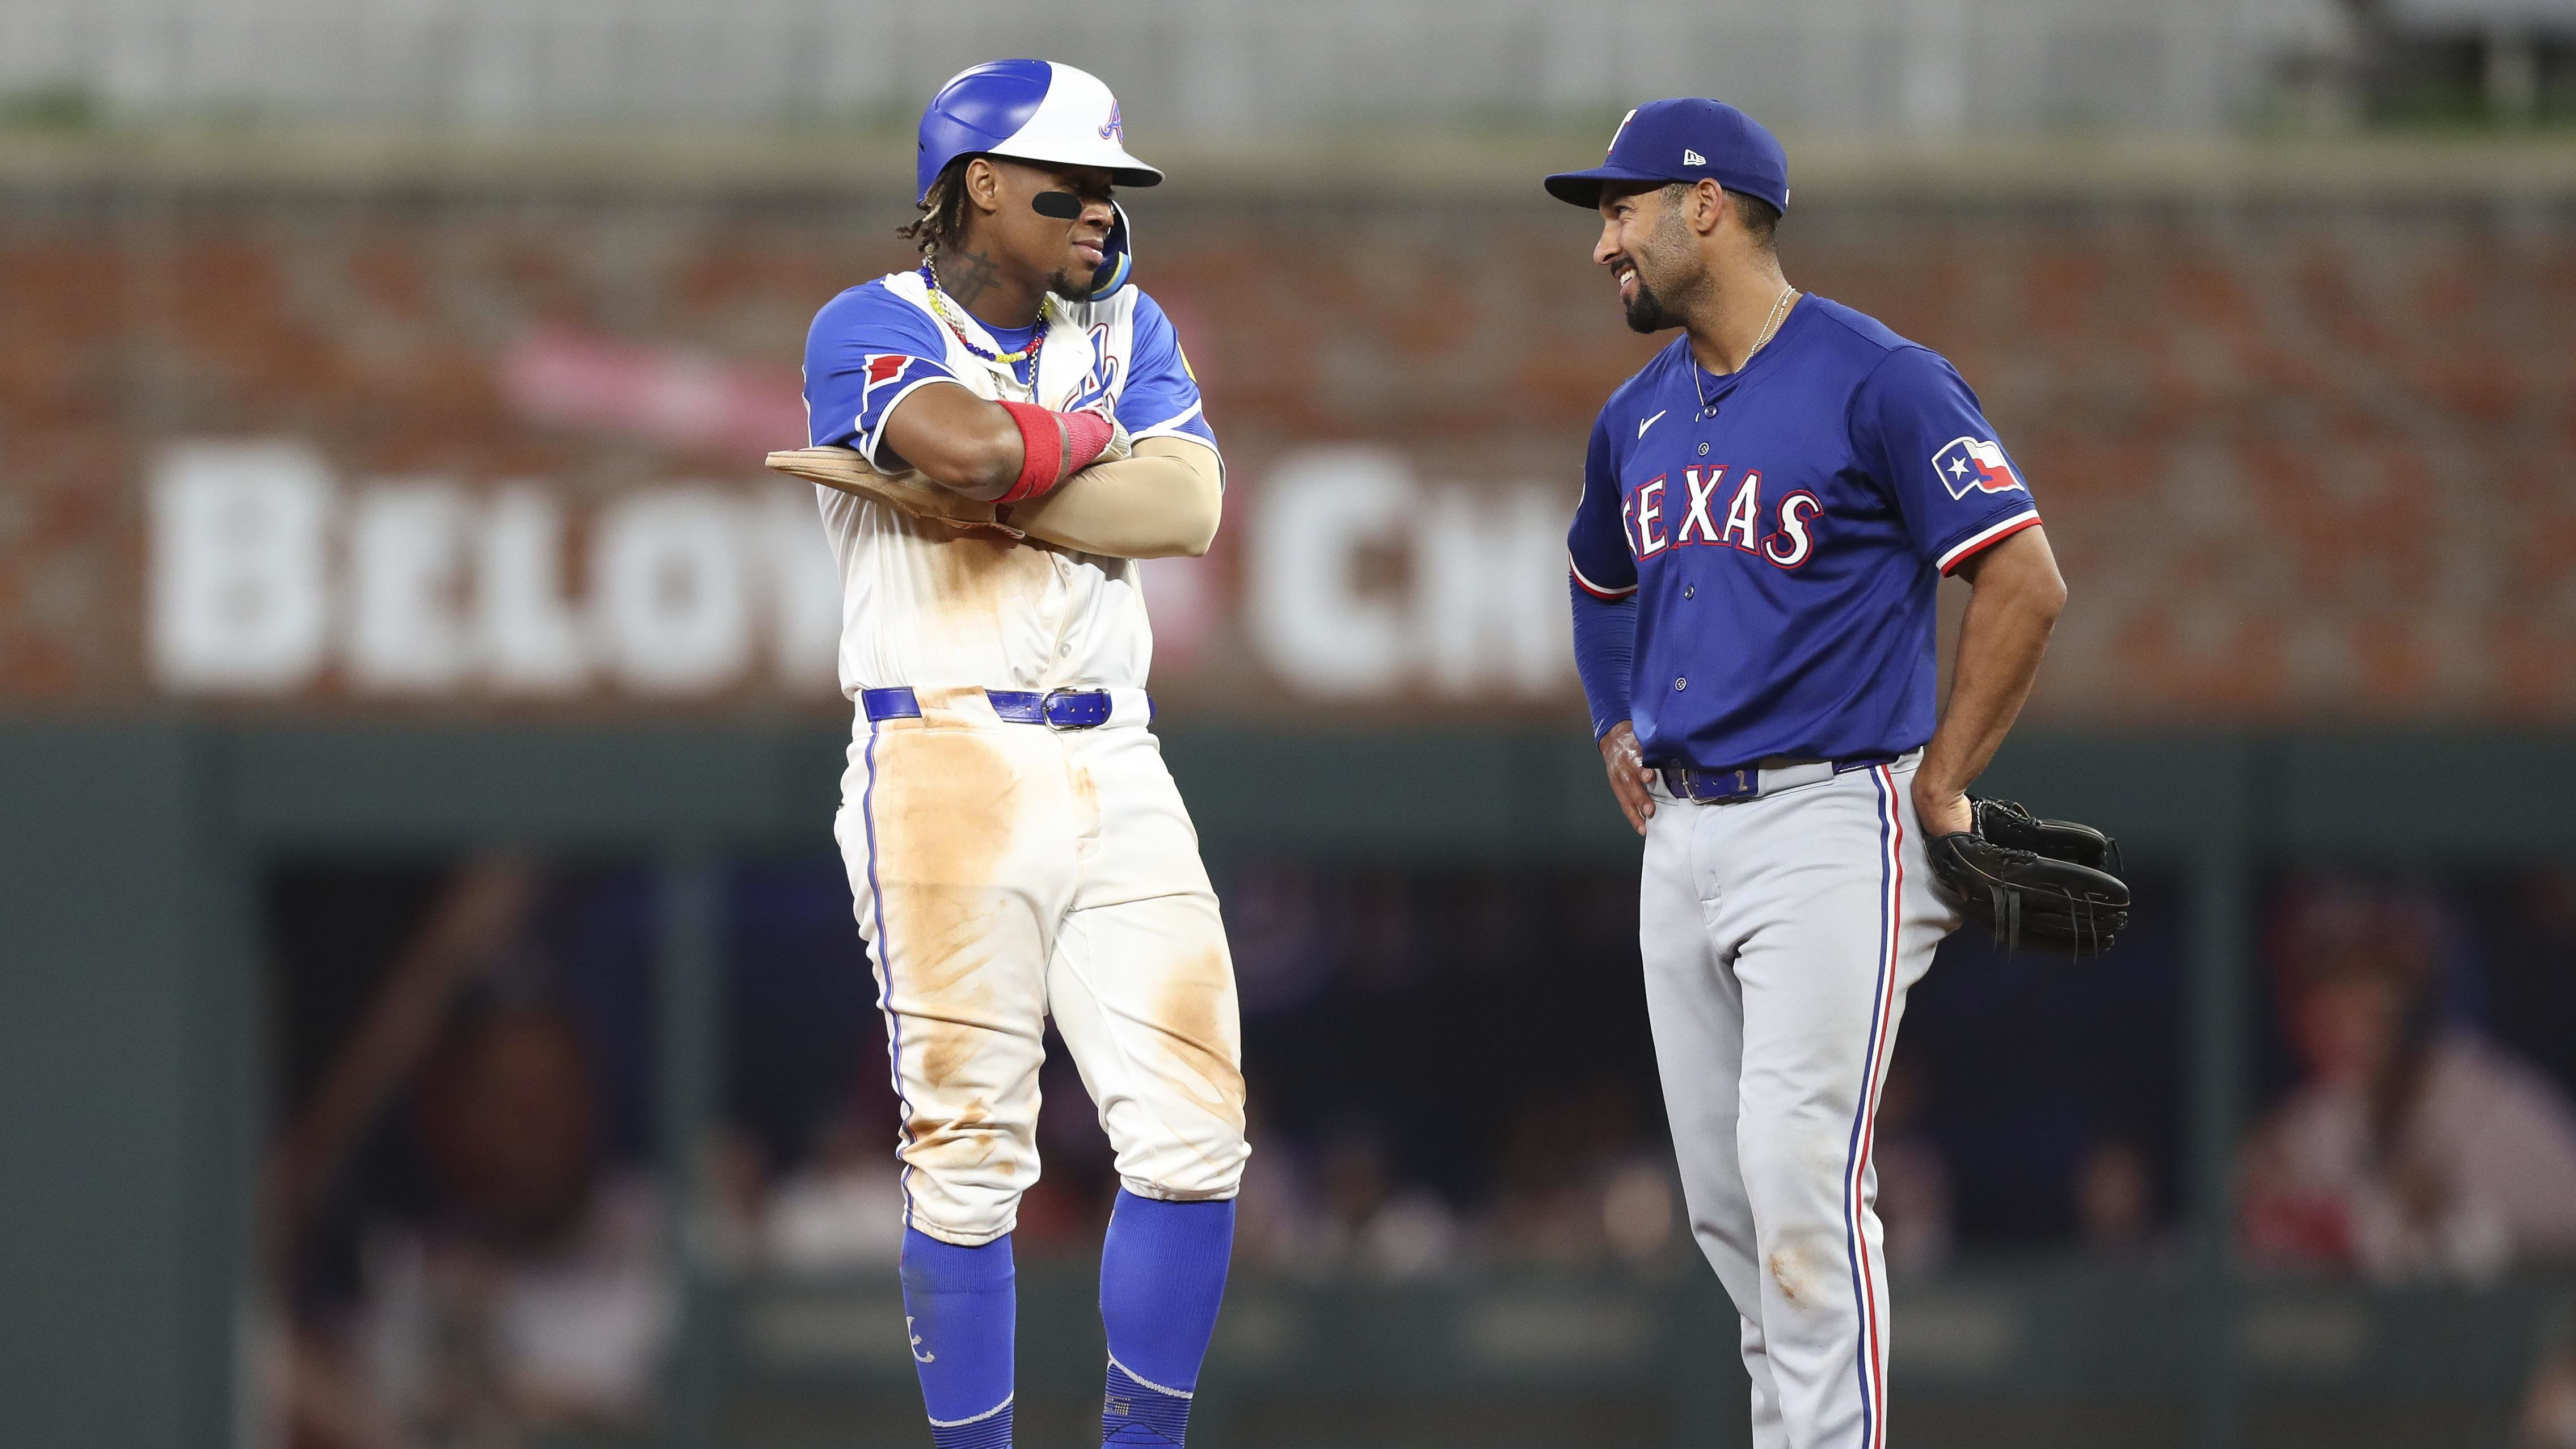 Atlanta Braves right fielder Ronald Acuna Jr and Texas Rangers infielder Marcus Semien chat during the 9th inning of Saturday night's Braves victory